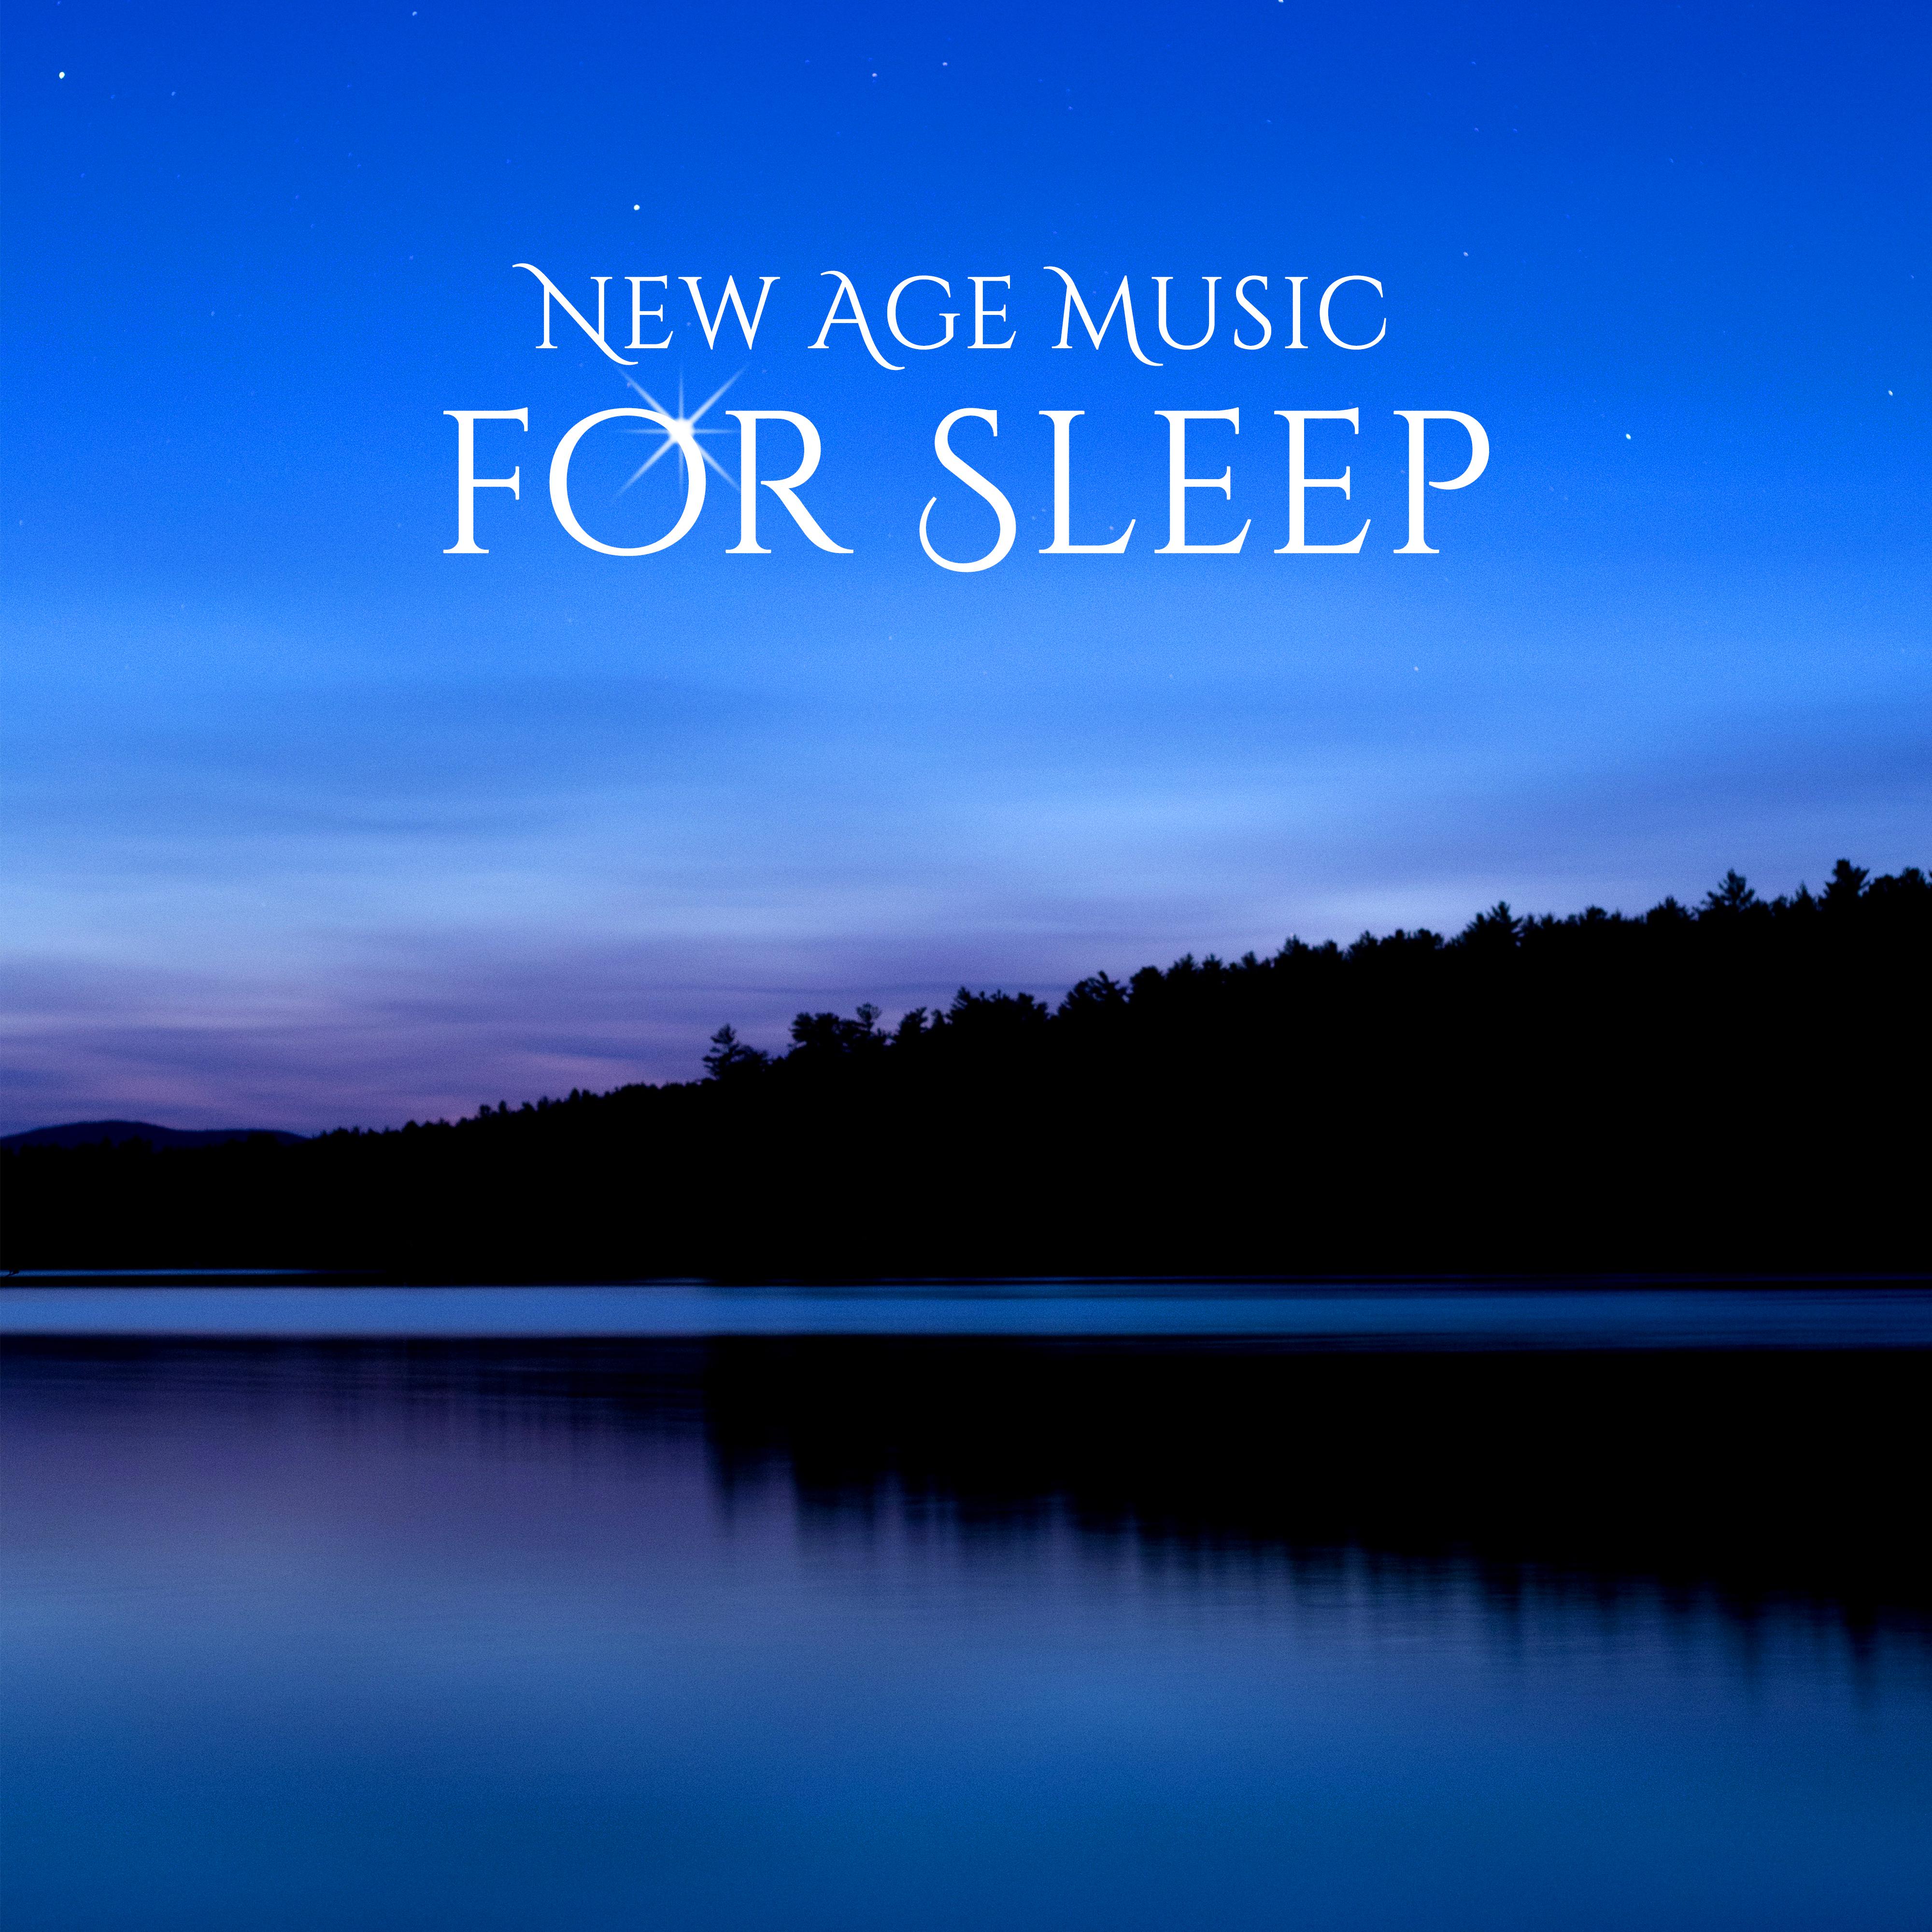 New Age Music for Sleep  Healing Sounds for Rest, Bedtime, Restful Sleep, Deep Dreams, Calm Nap, Relax